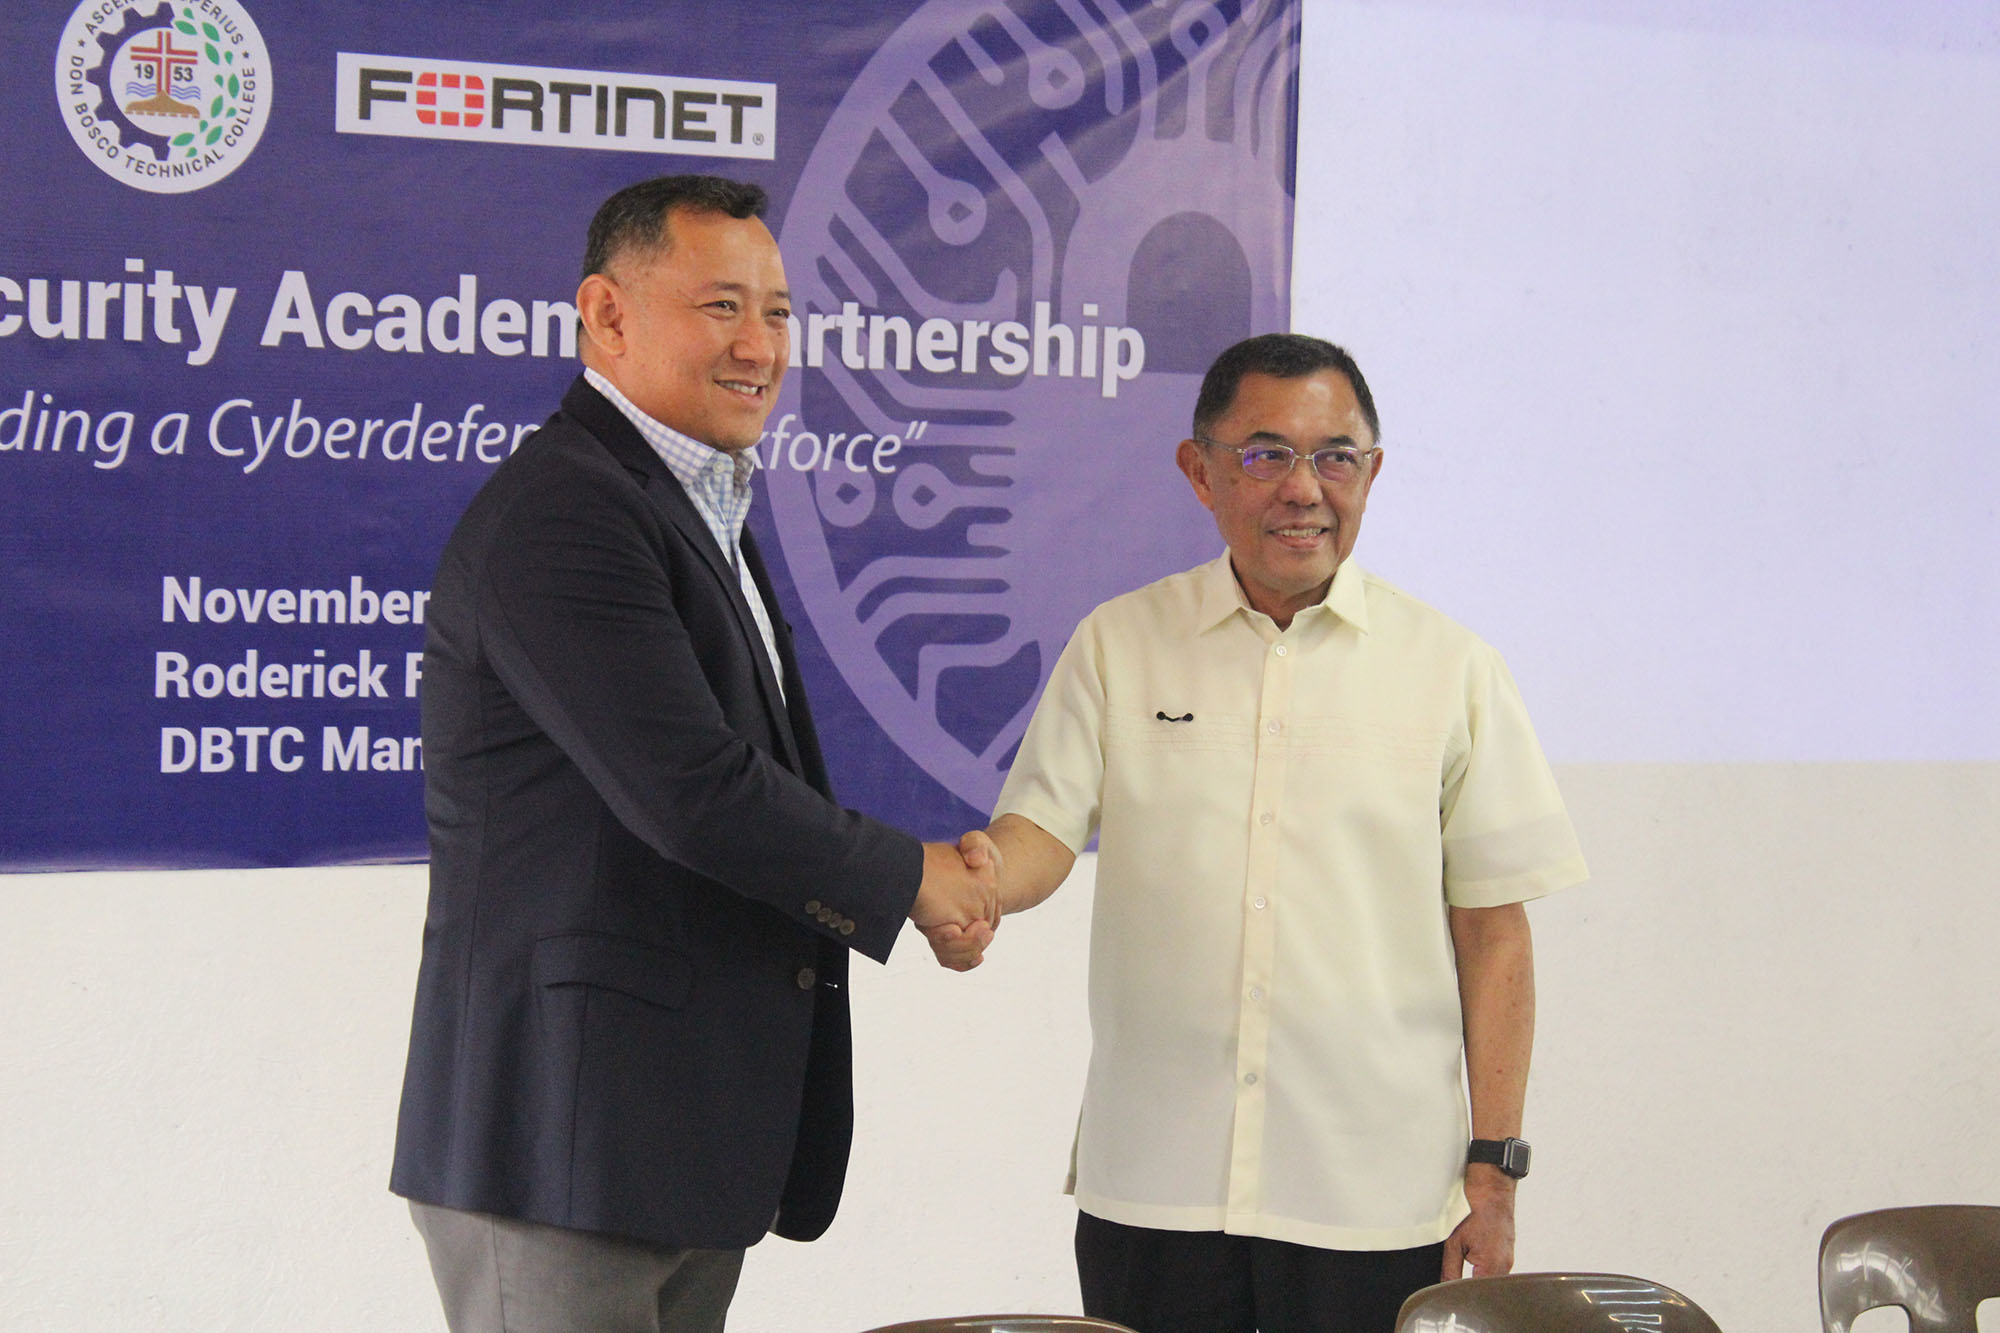 Don Bosco Technical College partners with Fortinet to develop cybersecurity talents in the Philippines